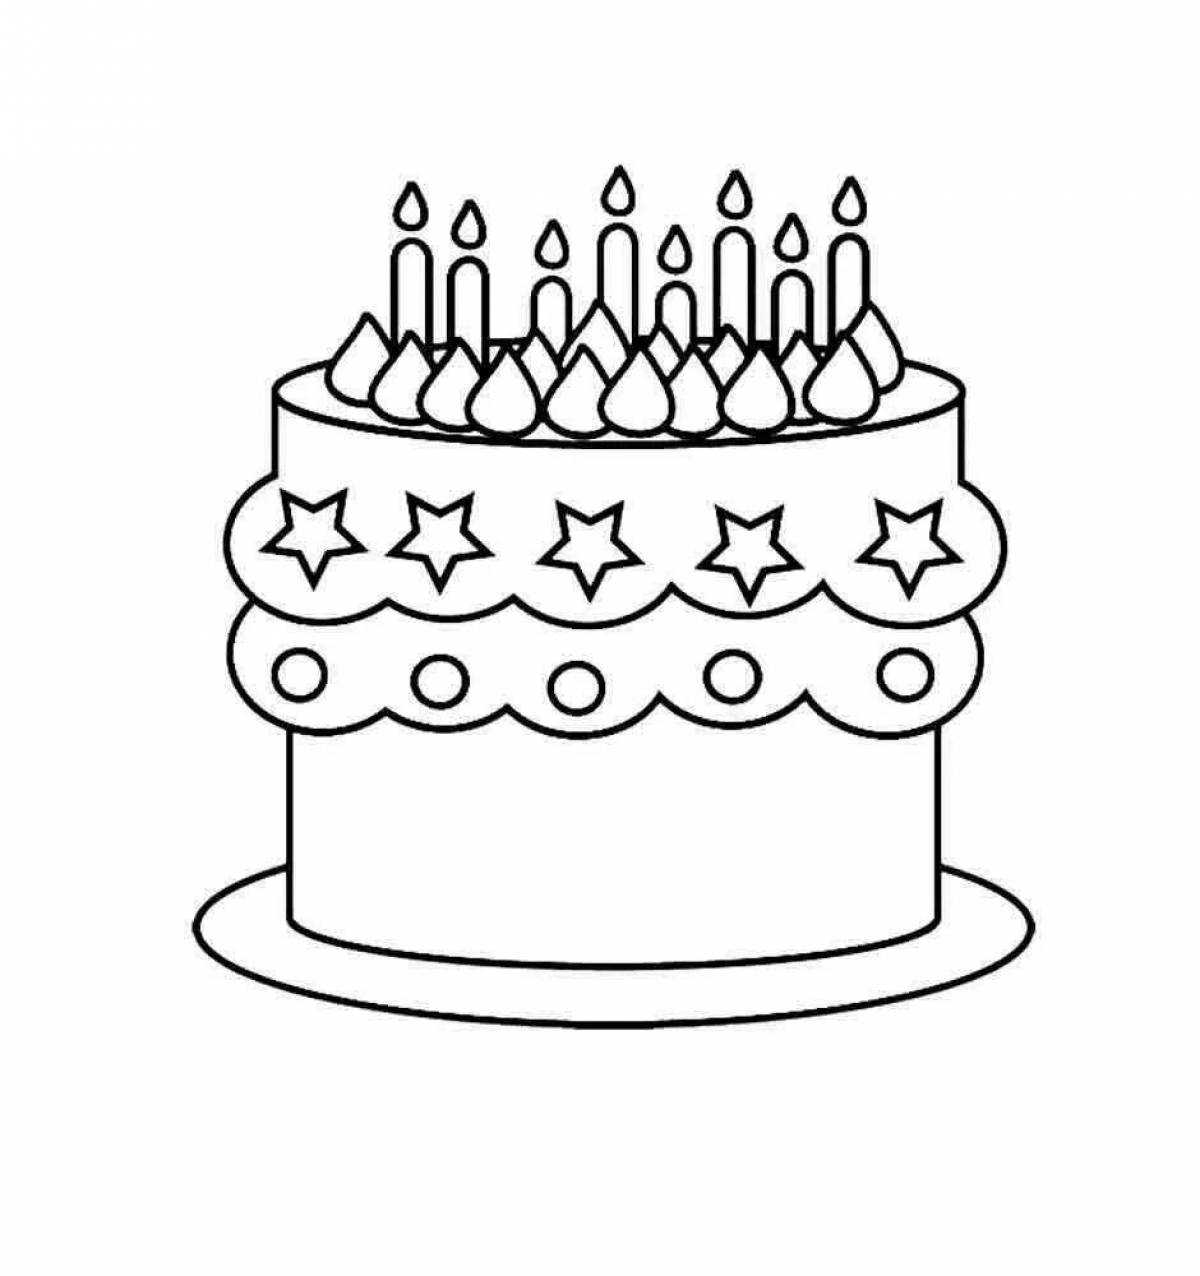 Gorgeous beautiful cake coloring page